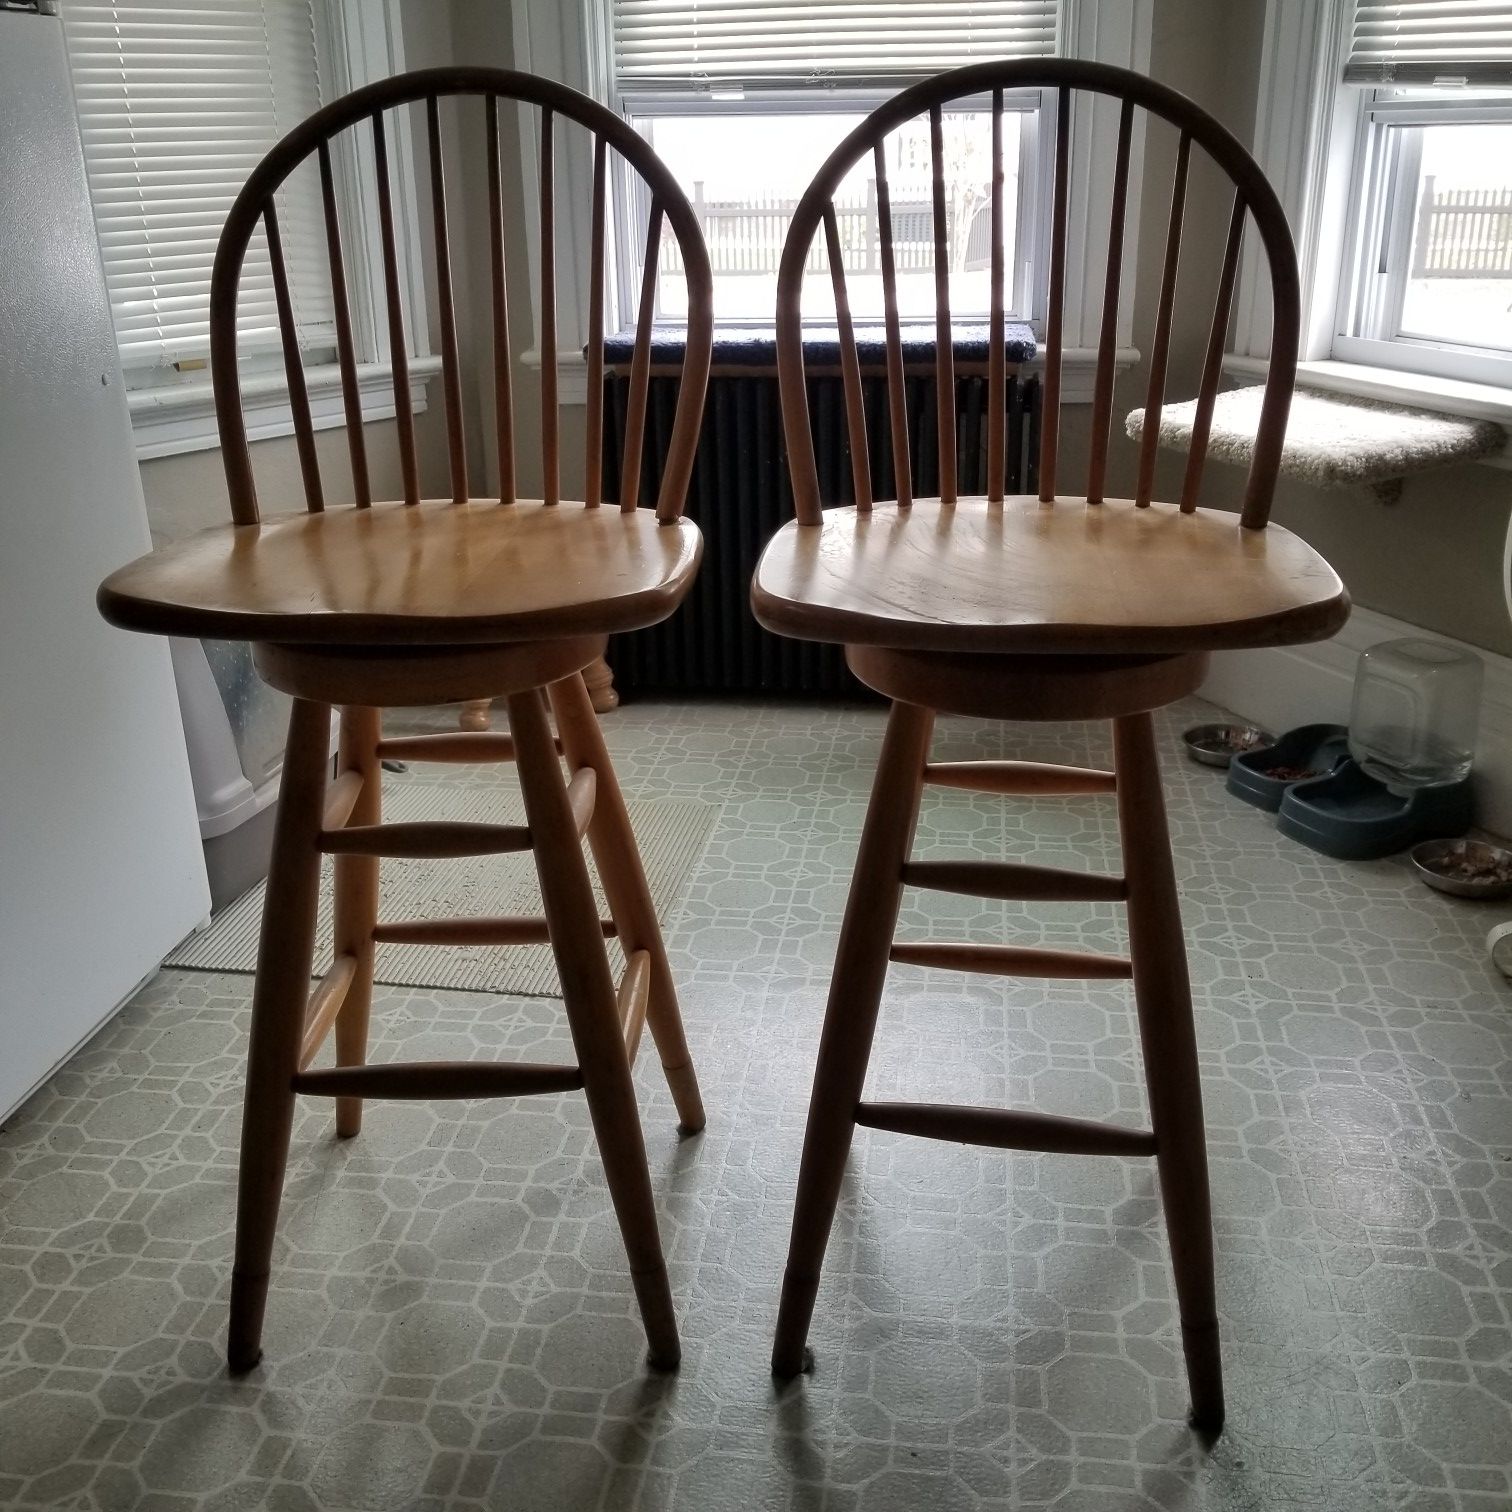 A pair of stools chairs